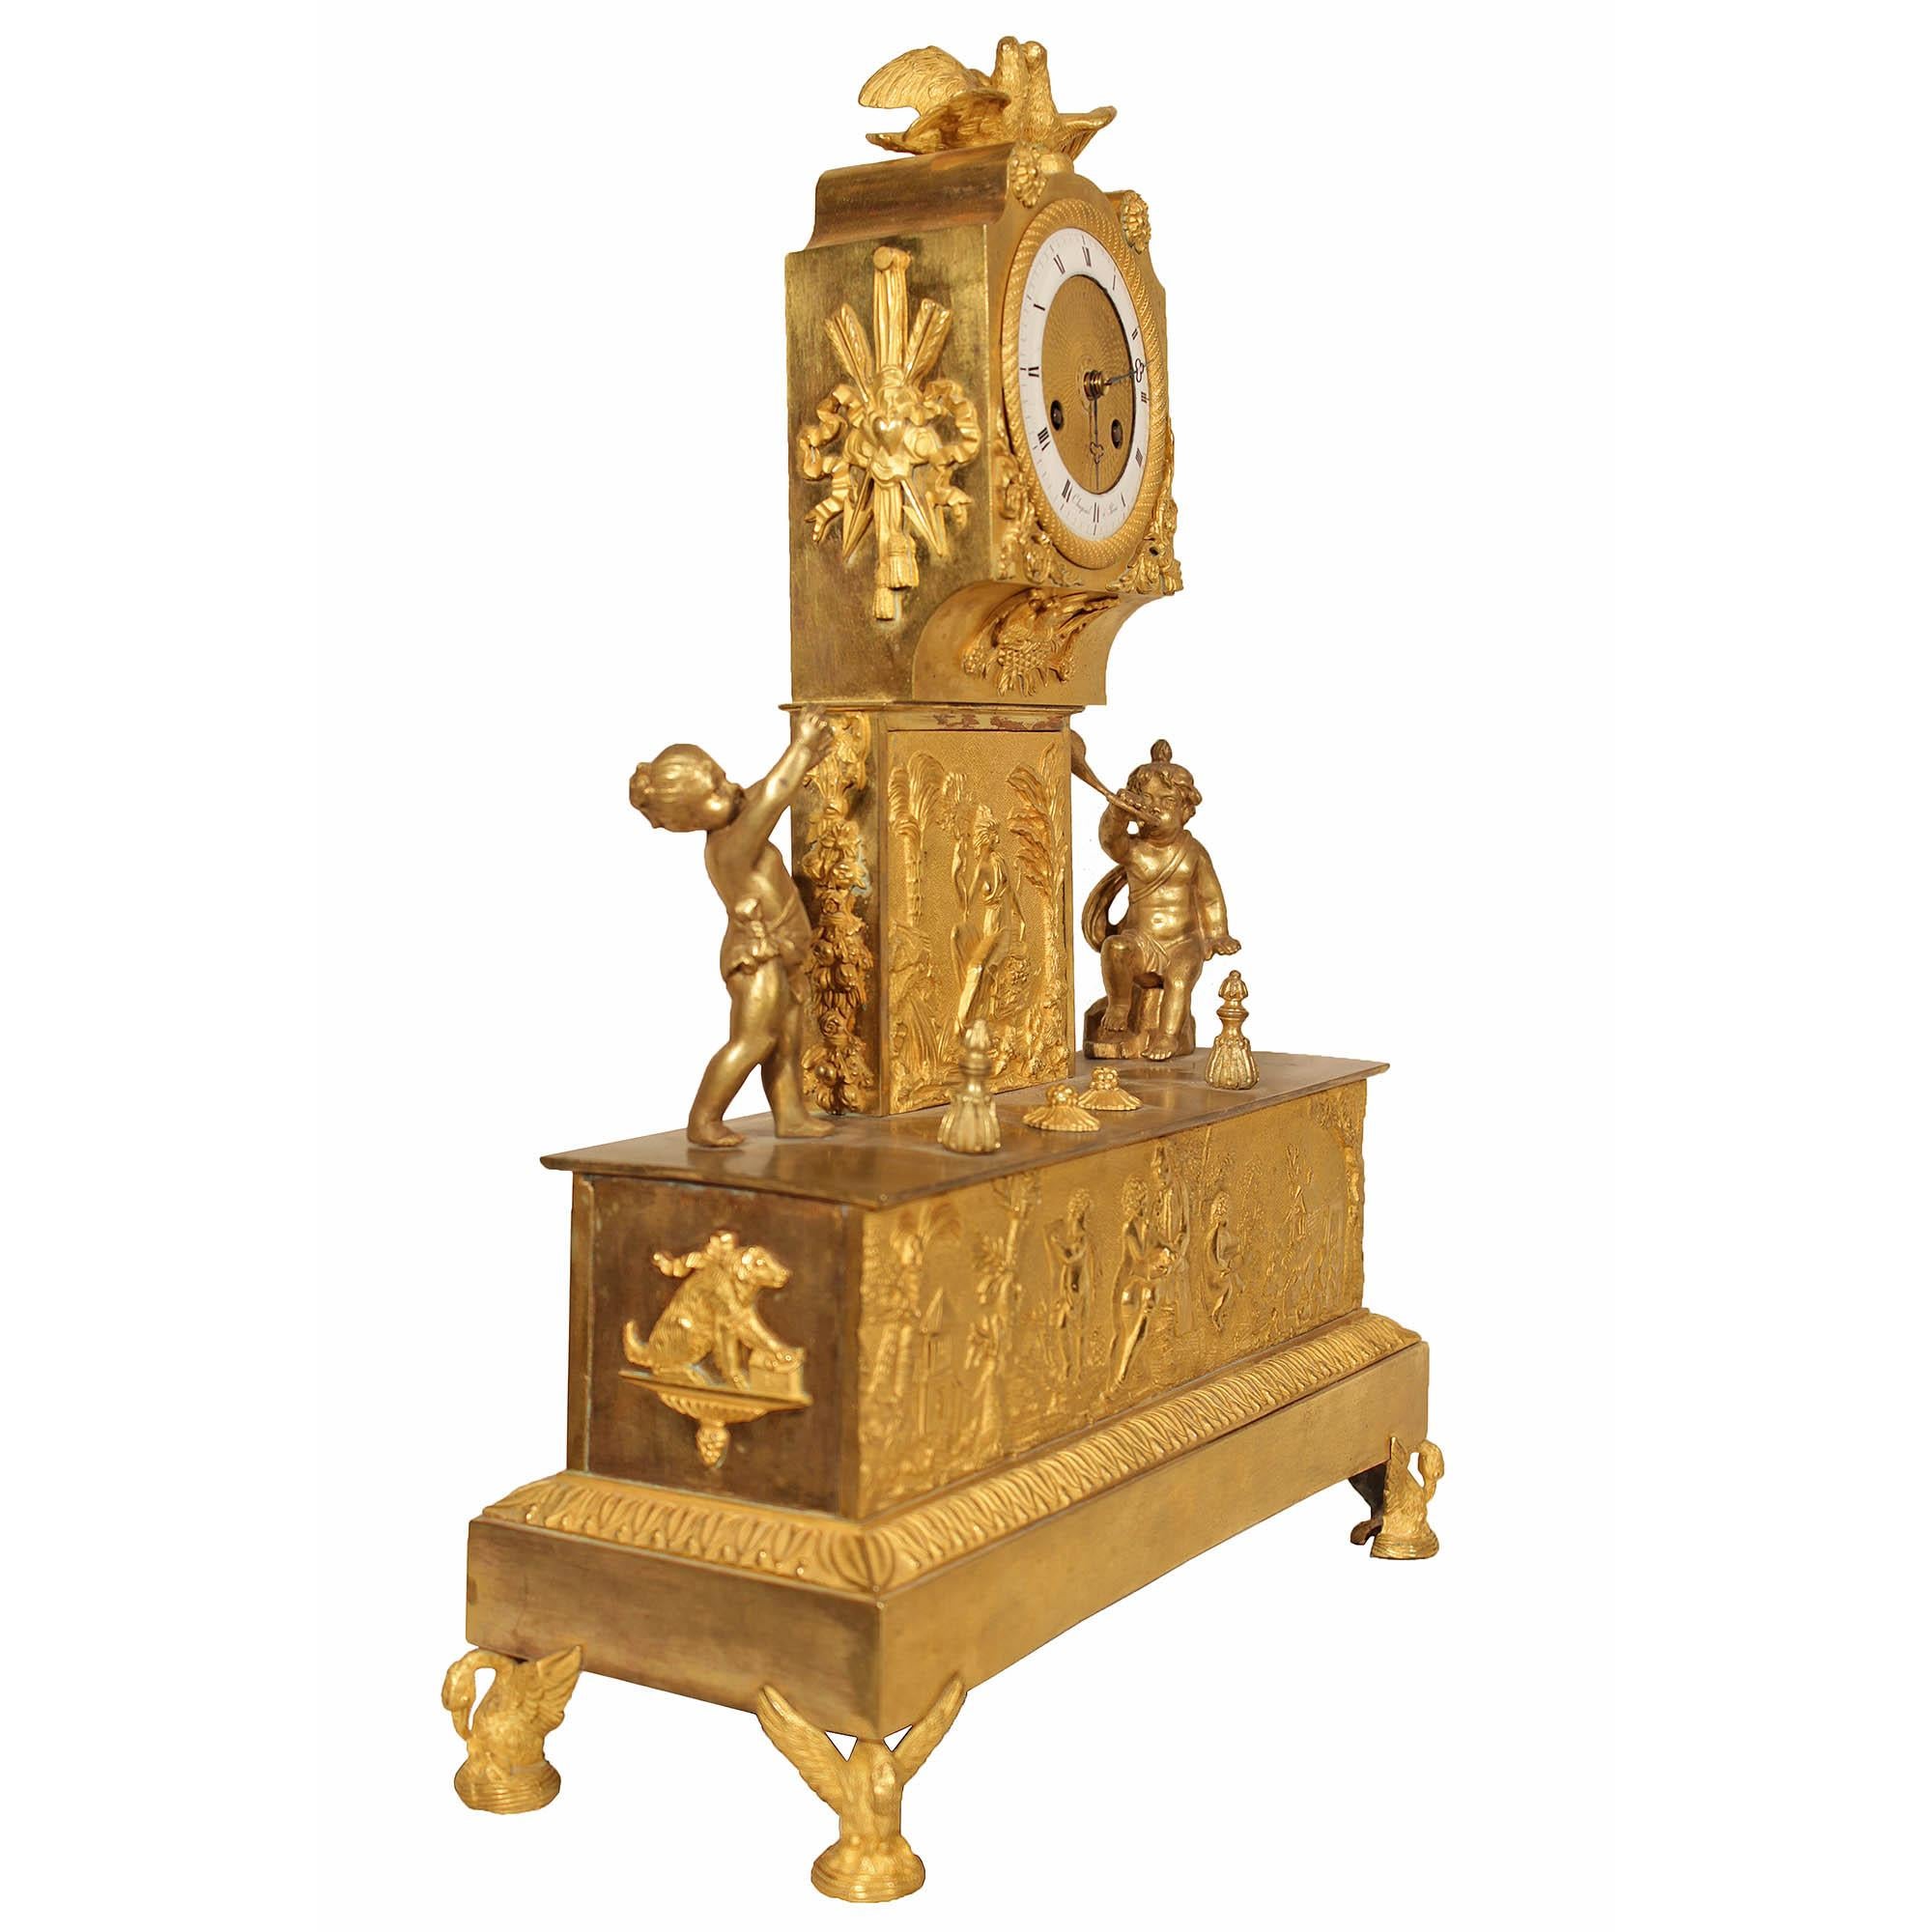 A spectacular and unique French early 19th century Louis XVI st. ormolu mantel clock, signed by Chapsal a Paris. The clock is raised on finely chased swan supports below a rectangular base. The façade has a finely chased plaque of a landscape scene